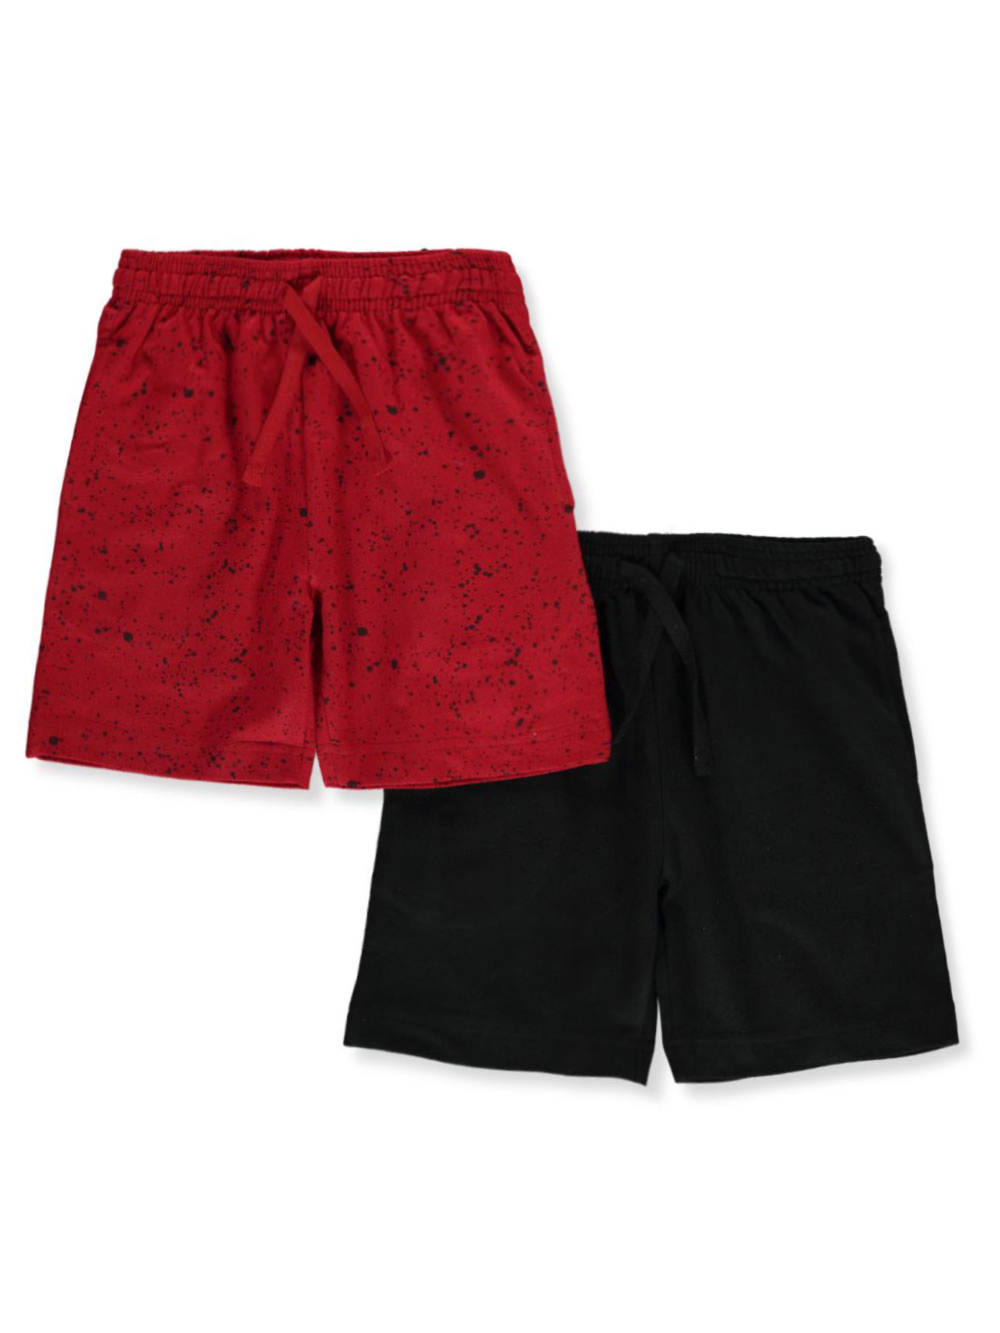 Size 5-6 Shorts for Boys